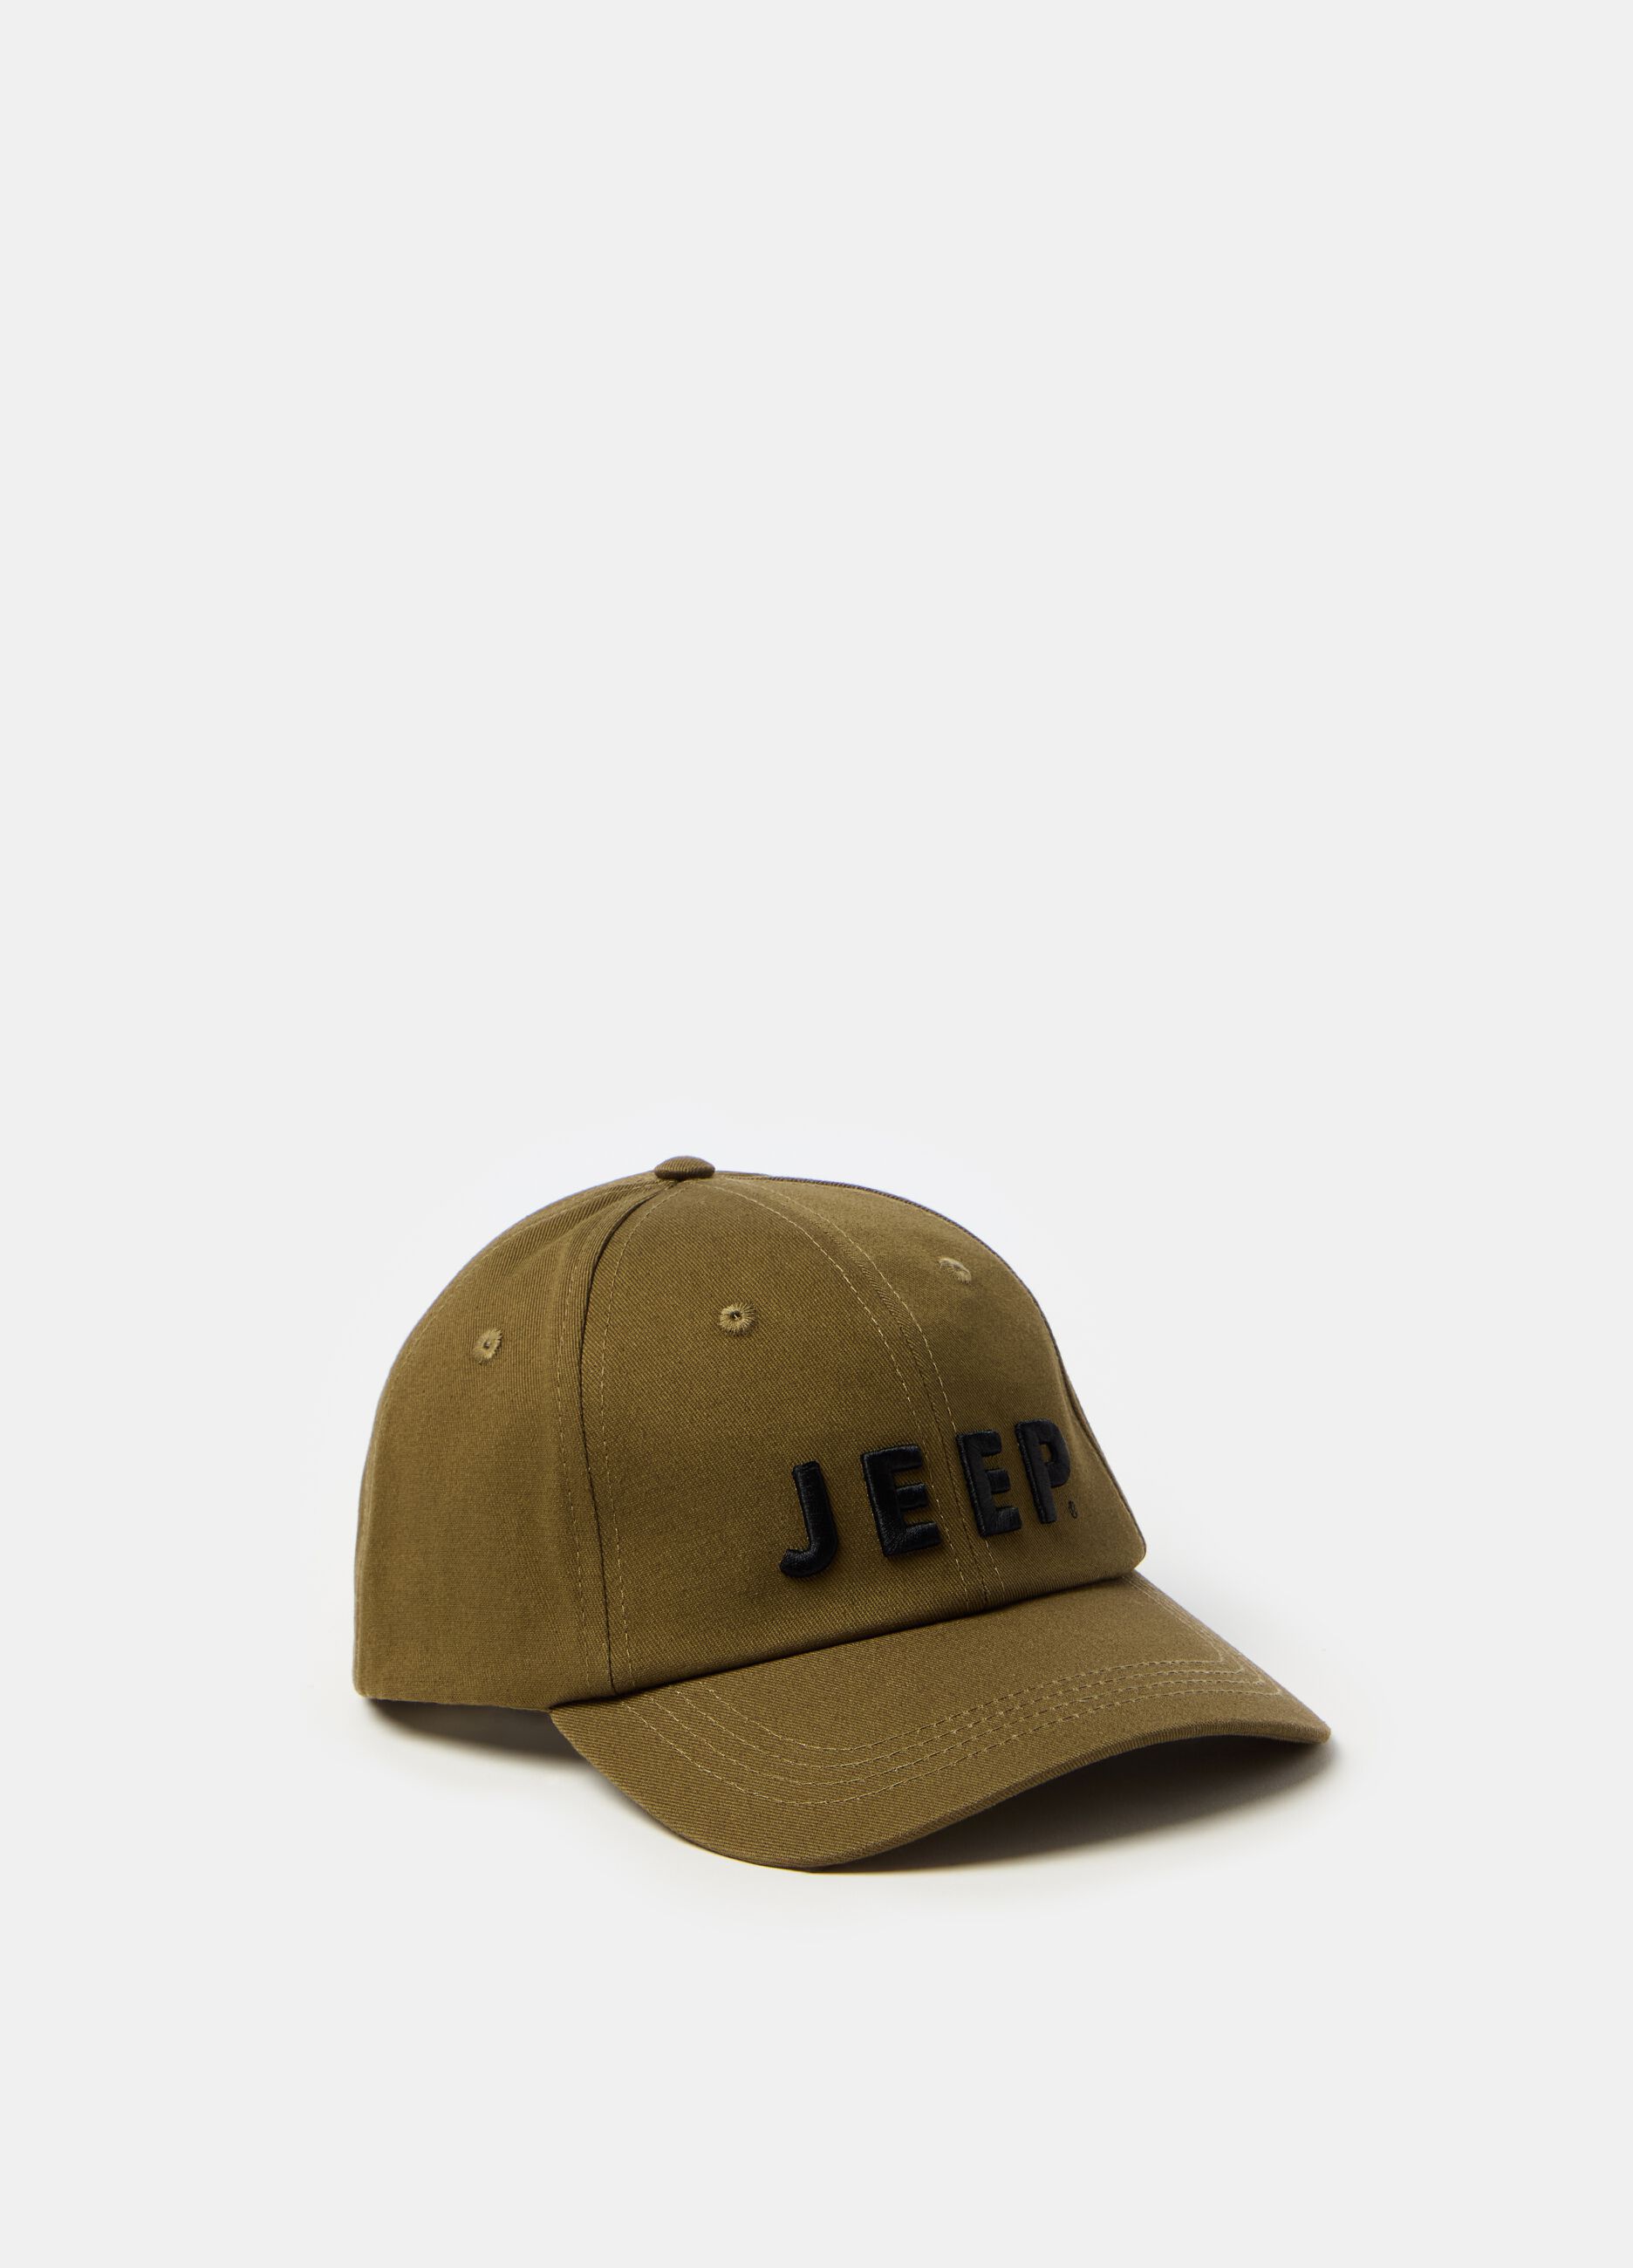 Baseball cap with Jeep embroidery